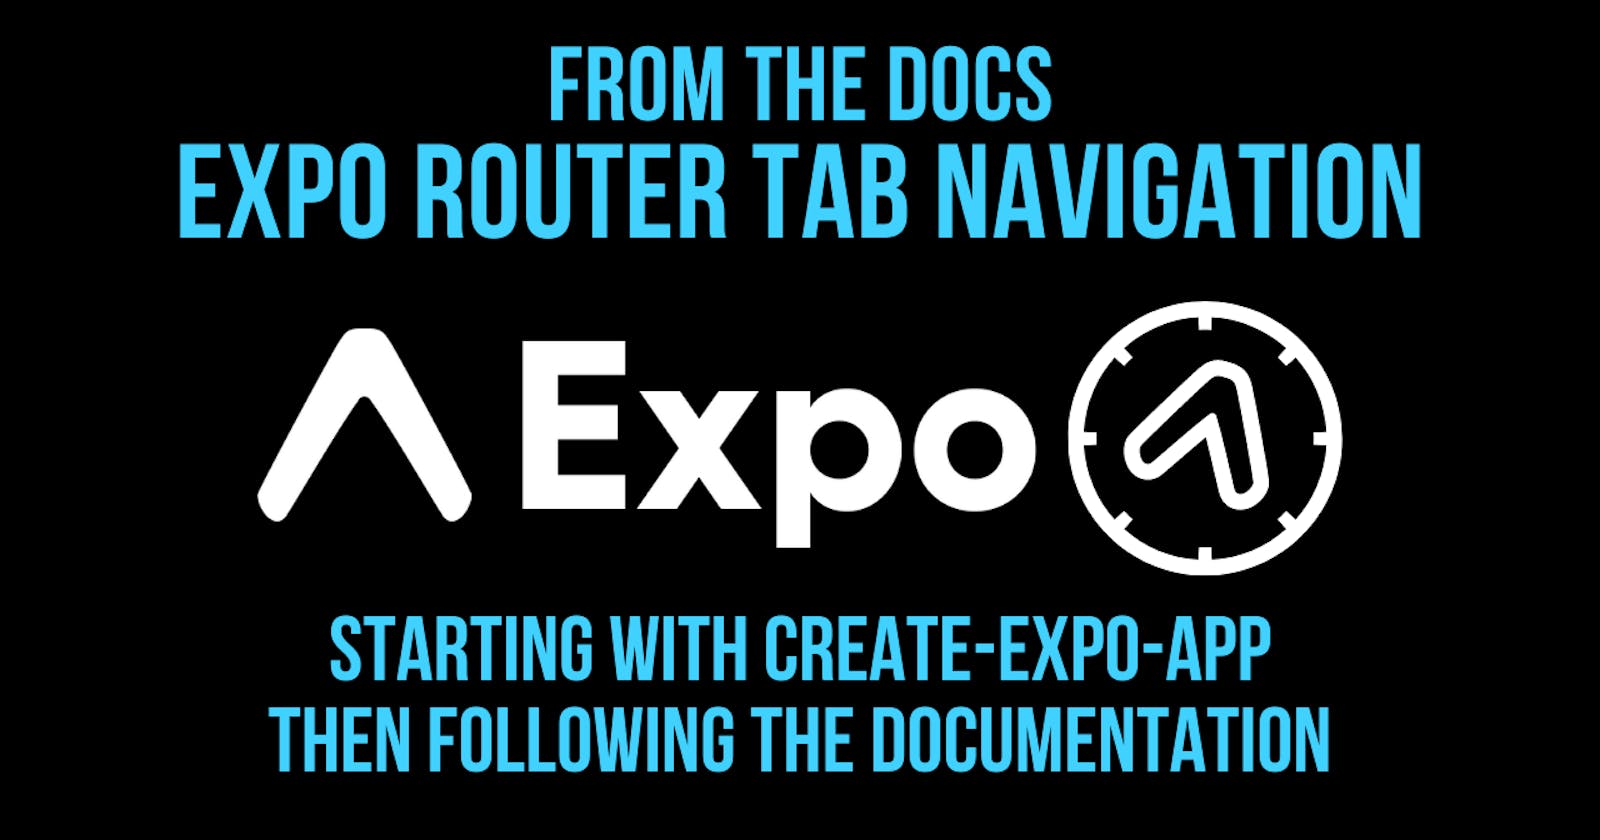 Expo Router Tab Navigation -From the Docs